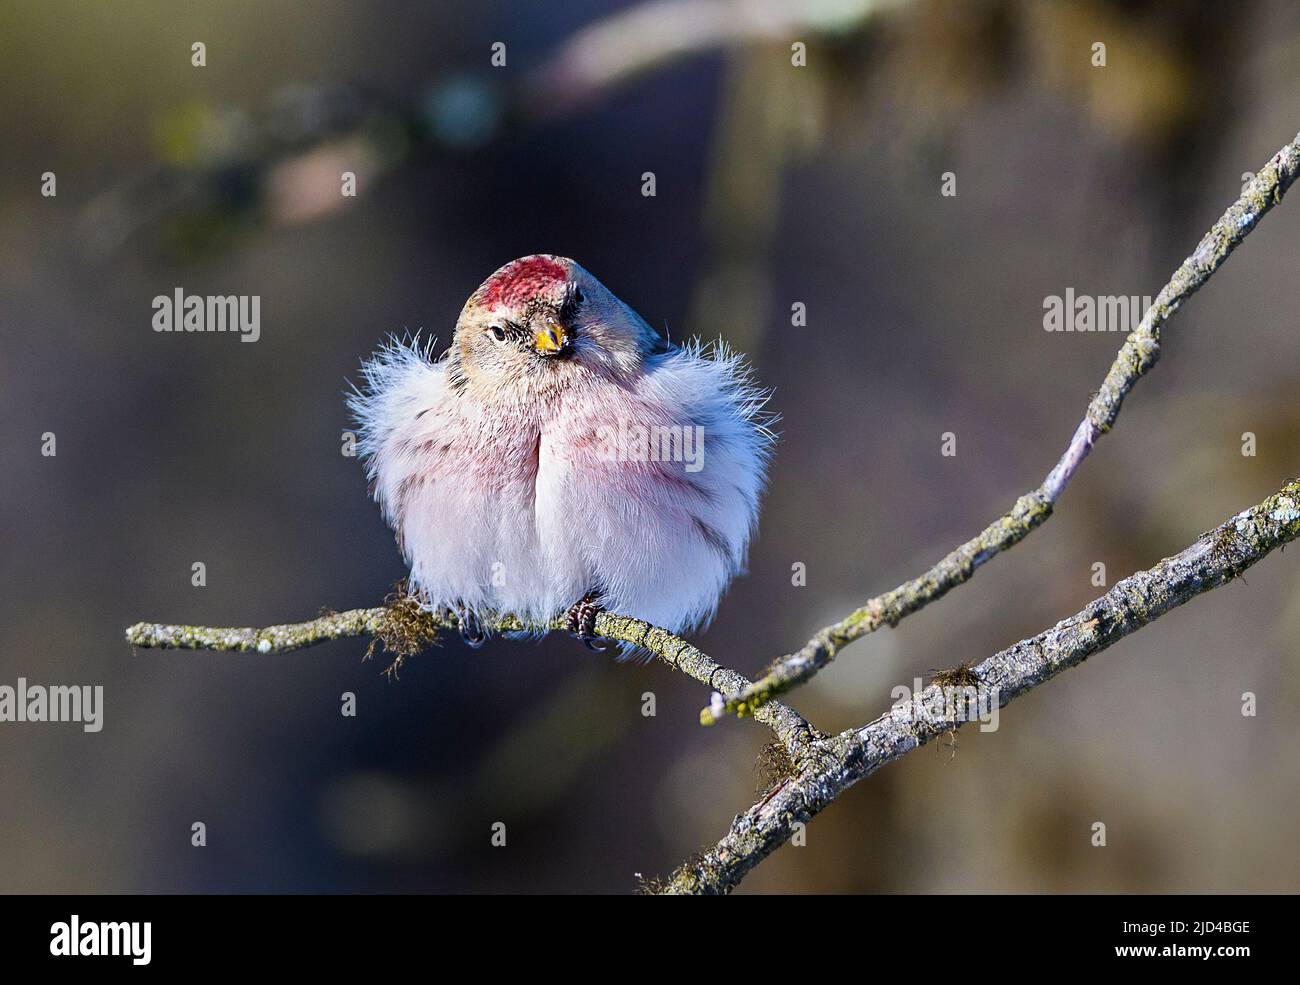 Arctic redpoll (Acanthis hornemanni) from Pasvik, Finnmark, Norway in March. Stock Photo